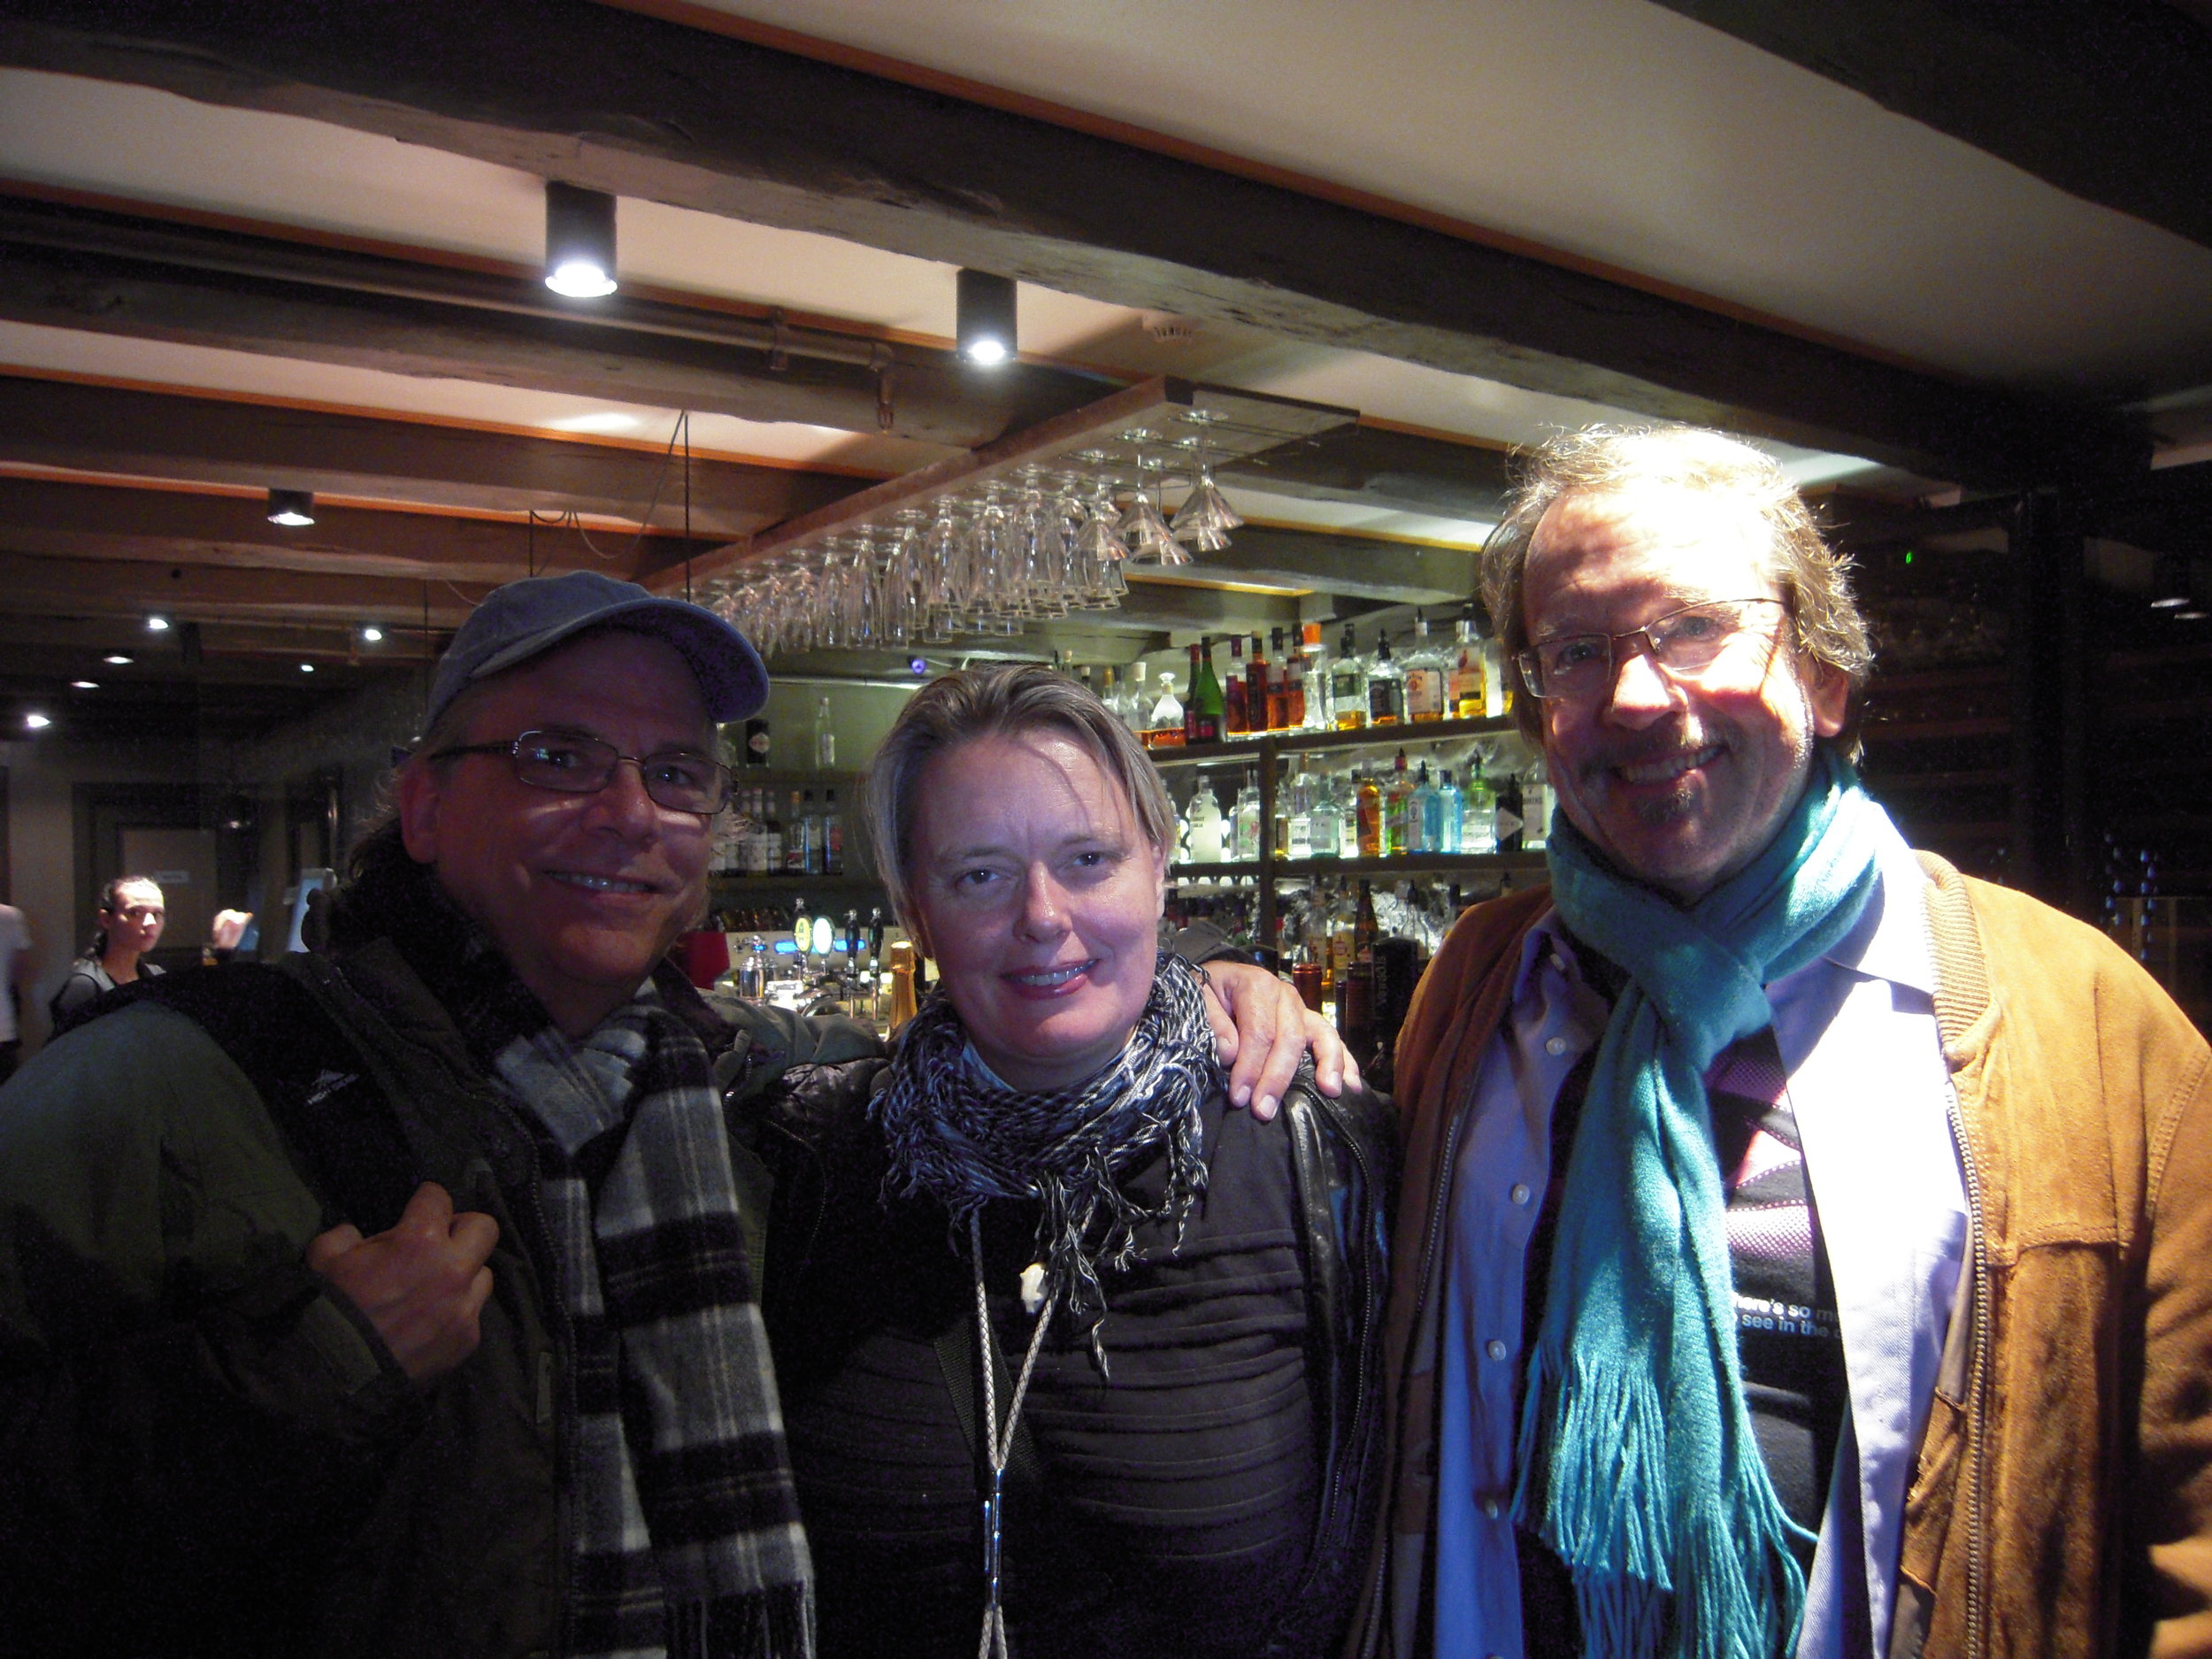 Dinner in Reykjavik, Iceland with Stephen Silha and Hrafnhildur Gunnarsdóttir, a film editor and political activist. She lived in San Francisco for several years, now home in Iceland.